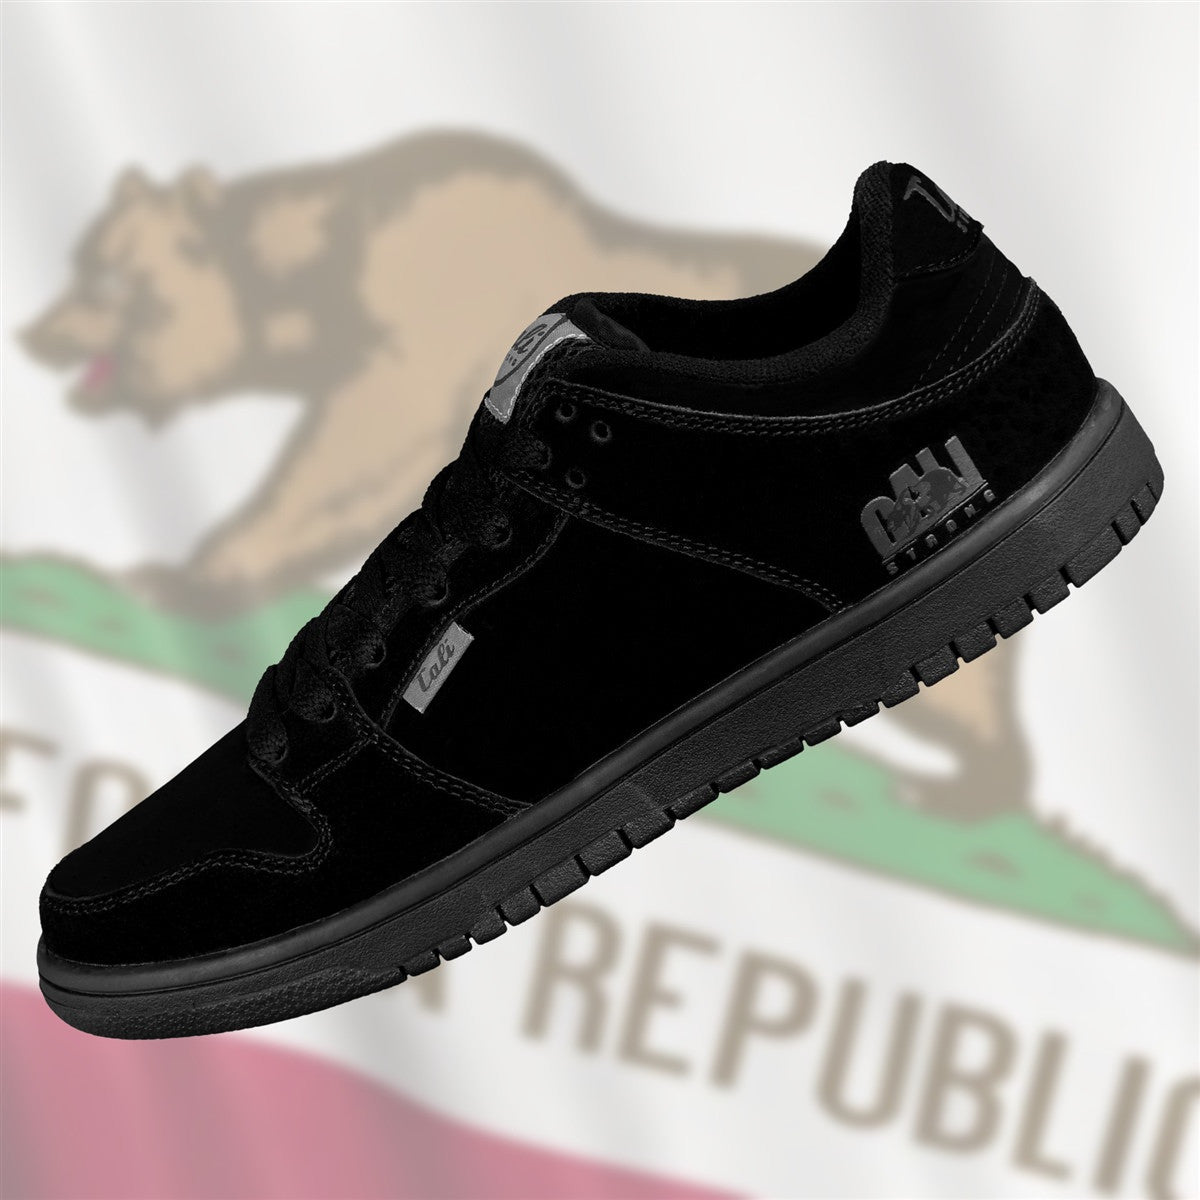 CALI Strong Hollywood All Black Skate Shoe - Shoes - Image 6 - CALI Strong